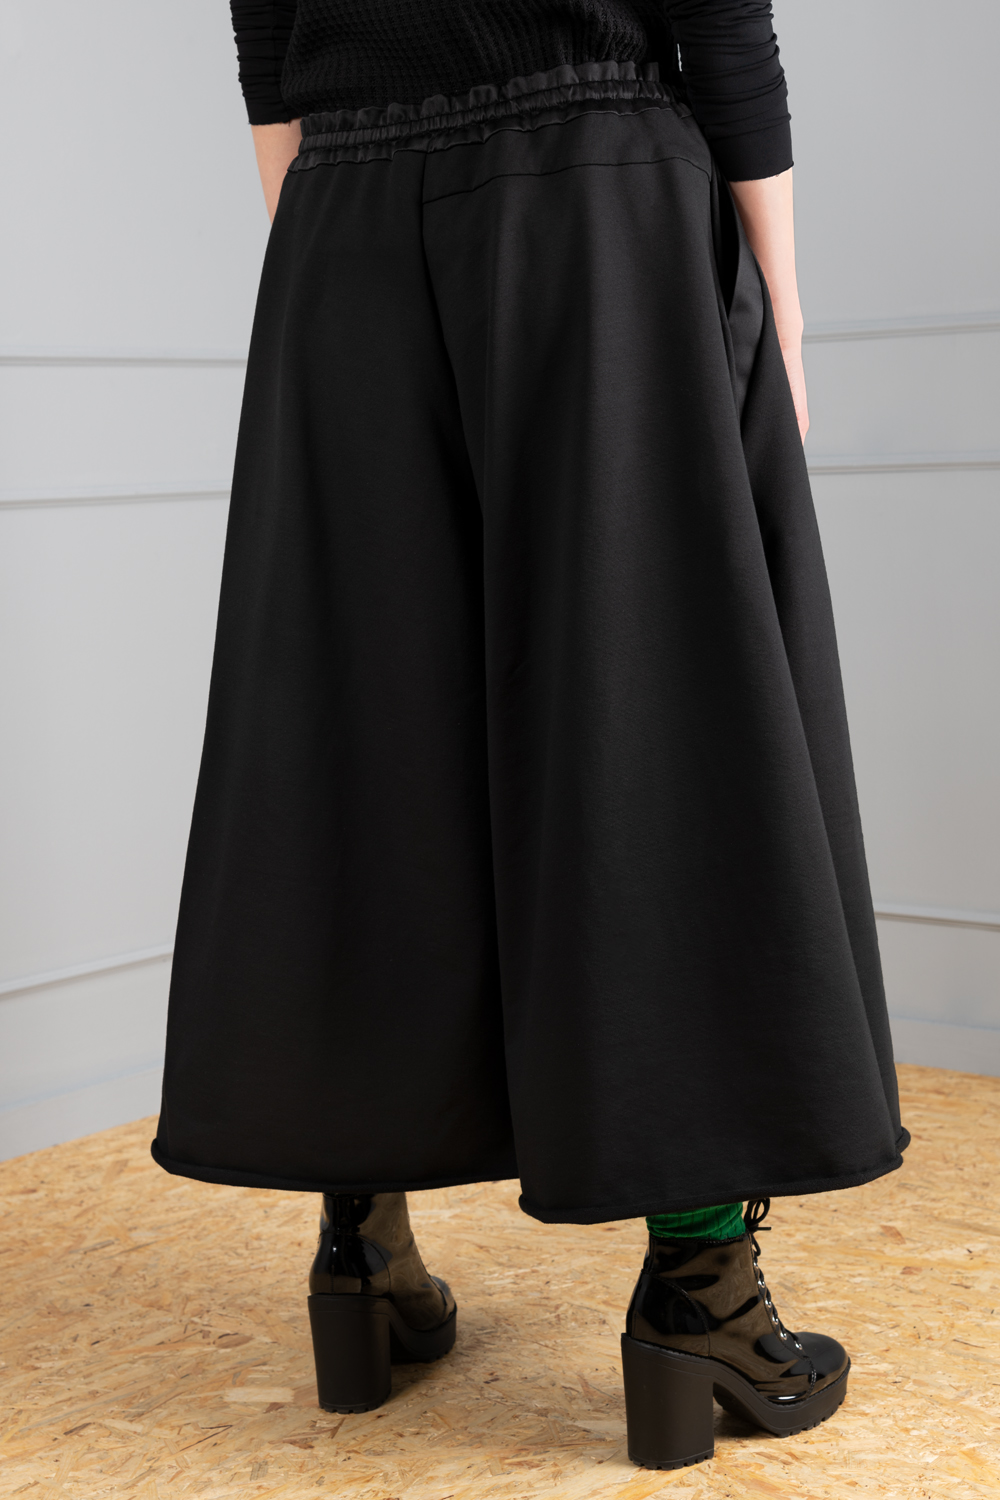 Black unisex skirt trousers for an eccentric look | Haruco-vert